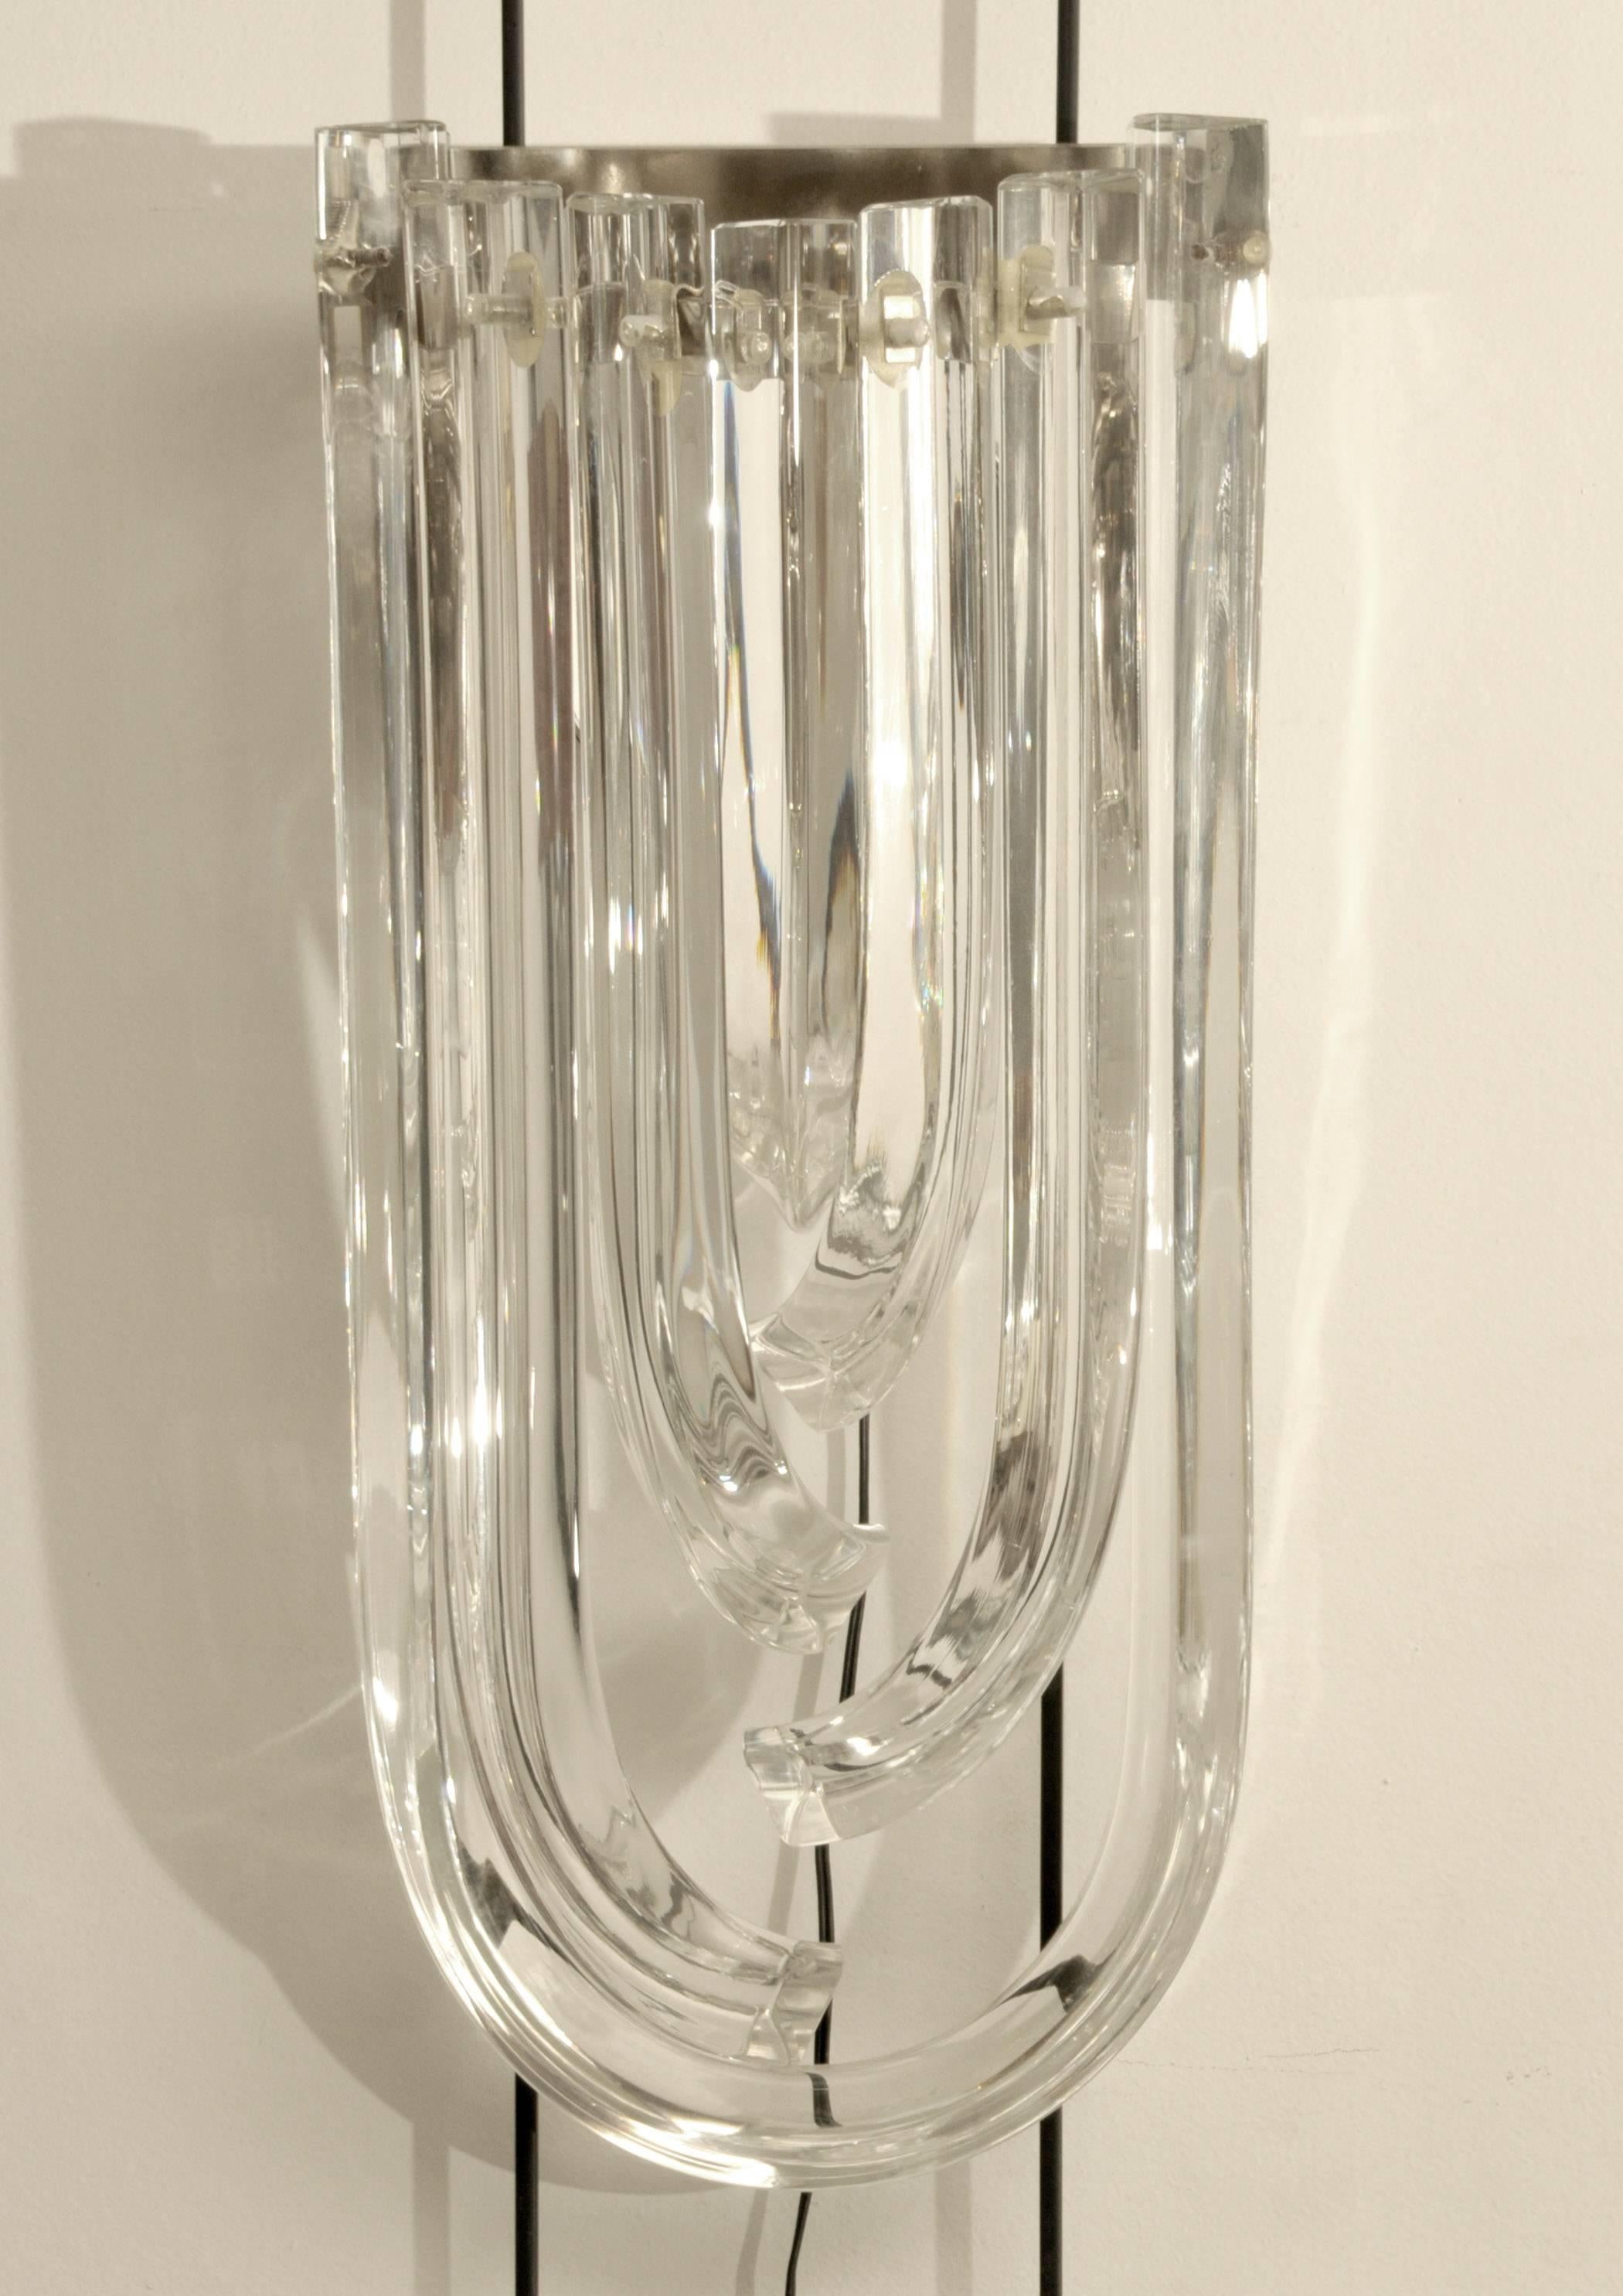 Pair of Murano curved crystal sconces.
Fixture in plated chrome.
Each sconce has one bulb.